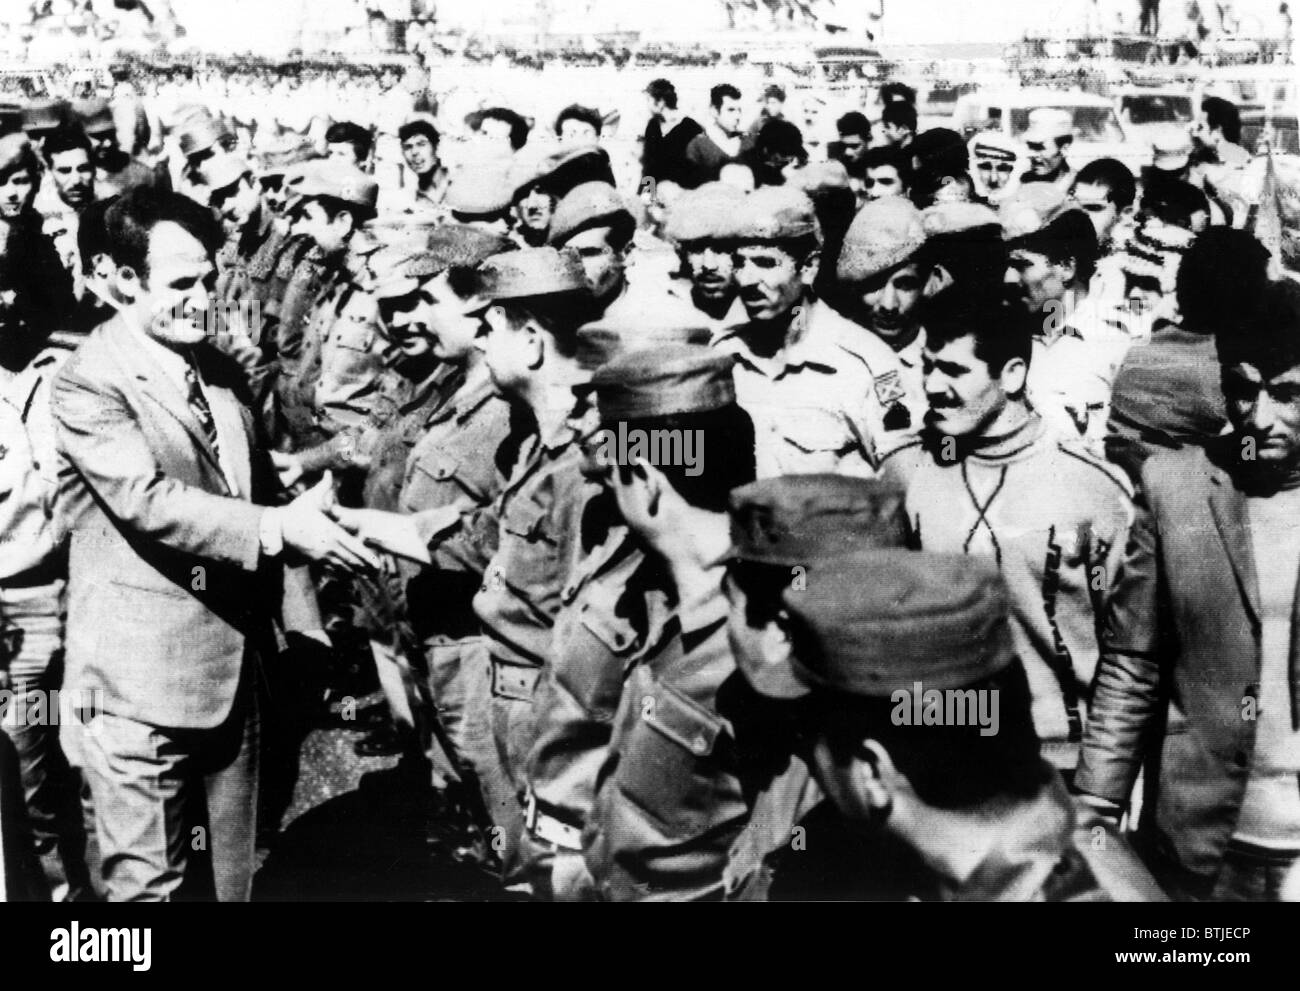 10/19/71--DERAA, SYRIA: Syrian President Hafez Assad (left) shakes hands with Syrian troops near the Syrian-Israeli border. In a Stock Photo